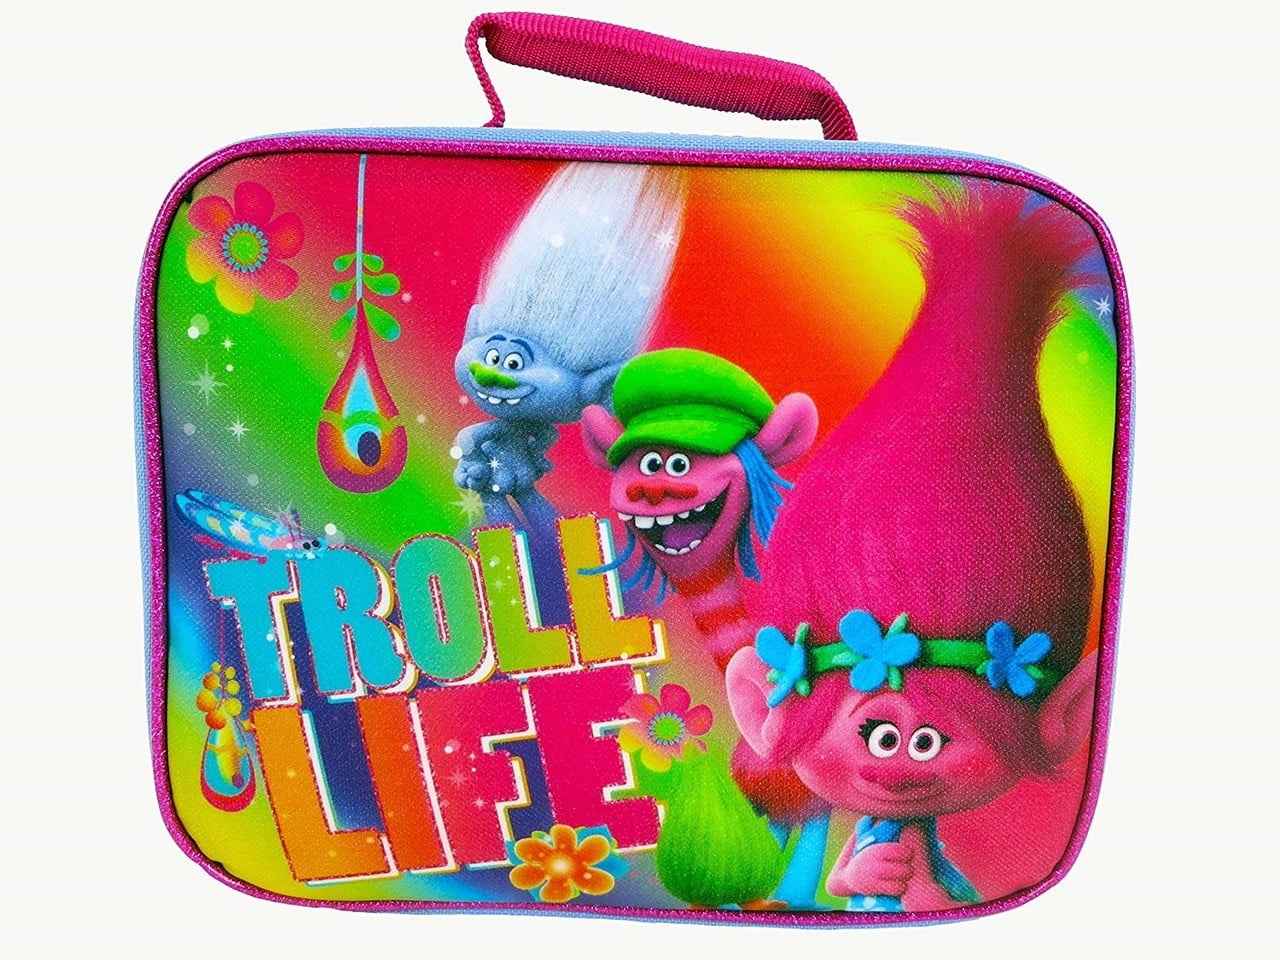 DreamWorks Trolls Insulated Dual Compartment Lunch Bag Lunch Box - Troll  Life 